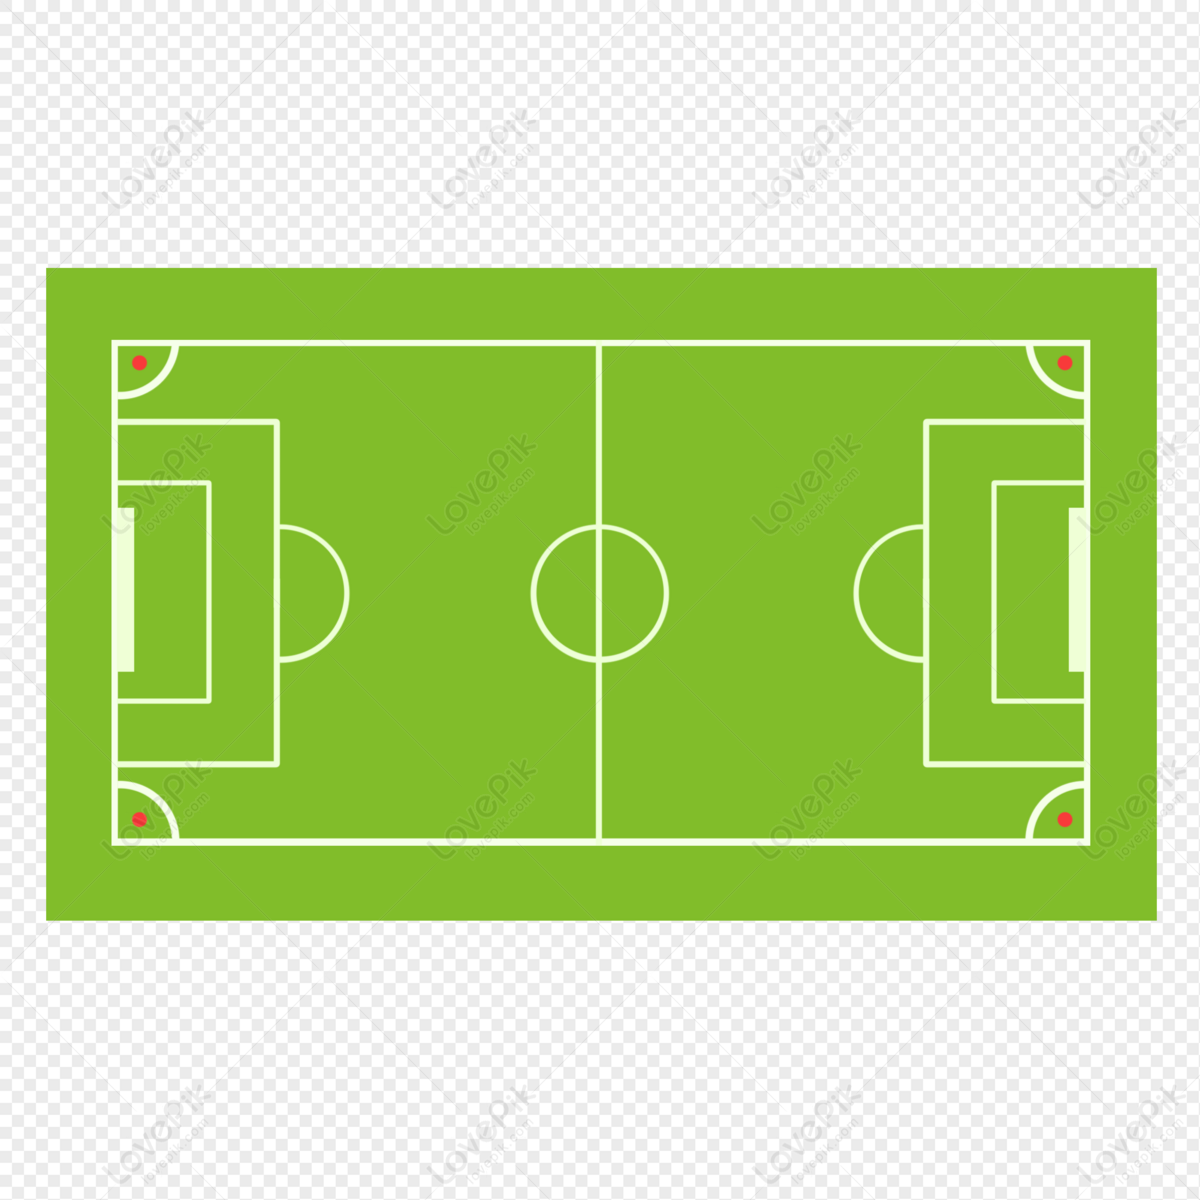 Hand Drawn Football Field PNG Transparent Background And Clipart Image For  Free Download - Lovepik | 401338700